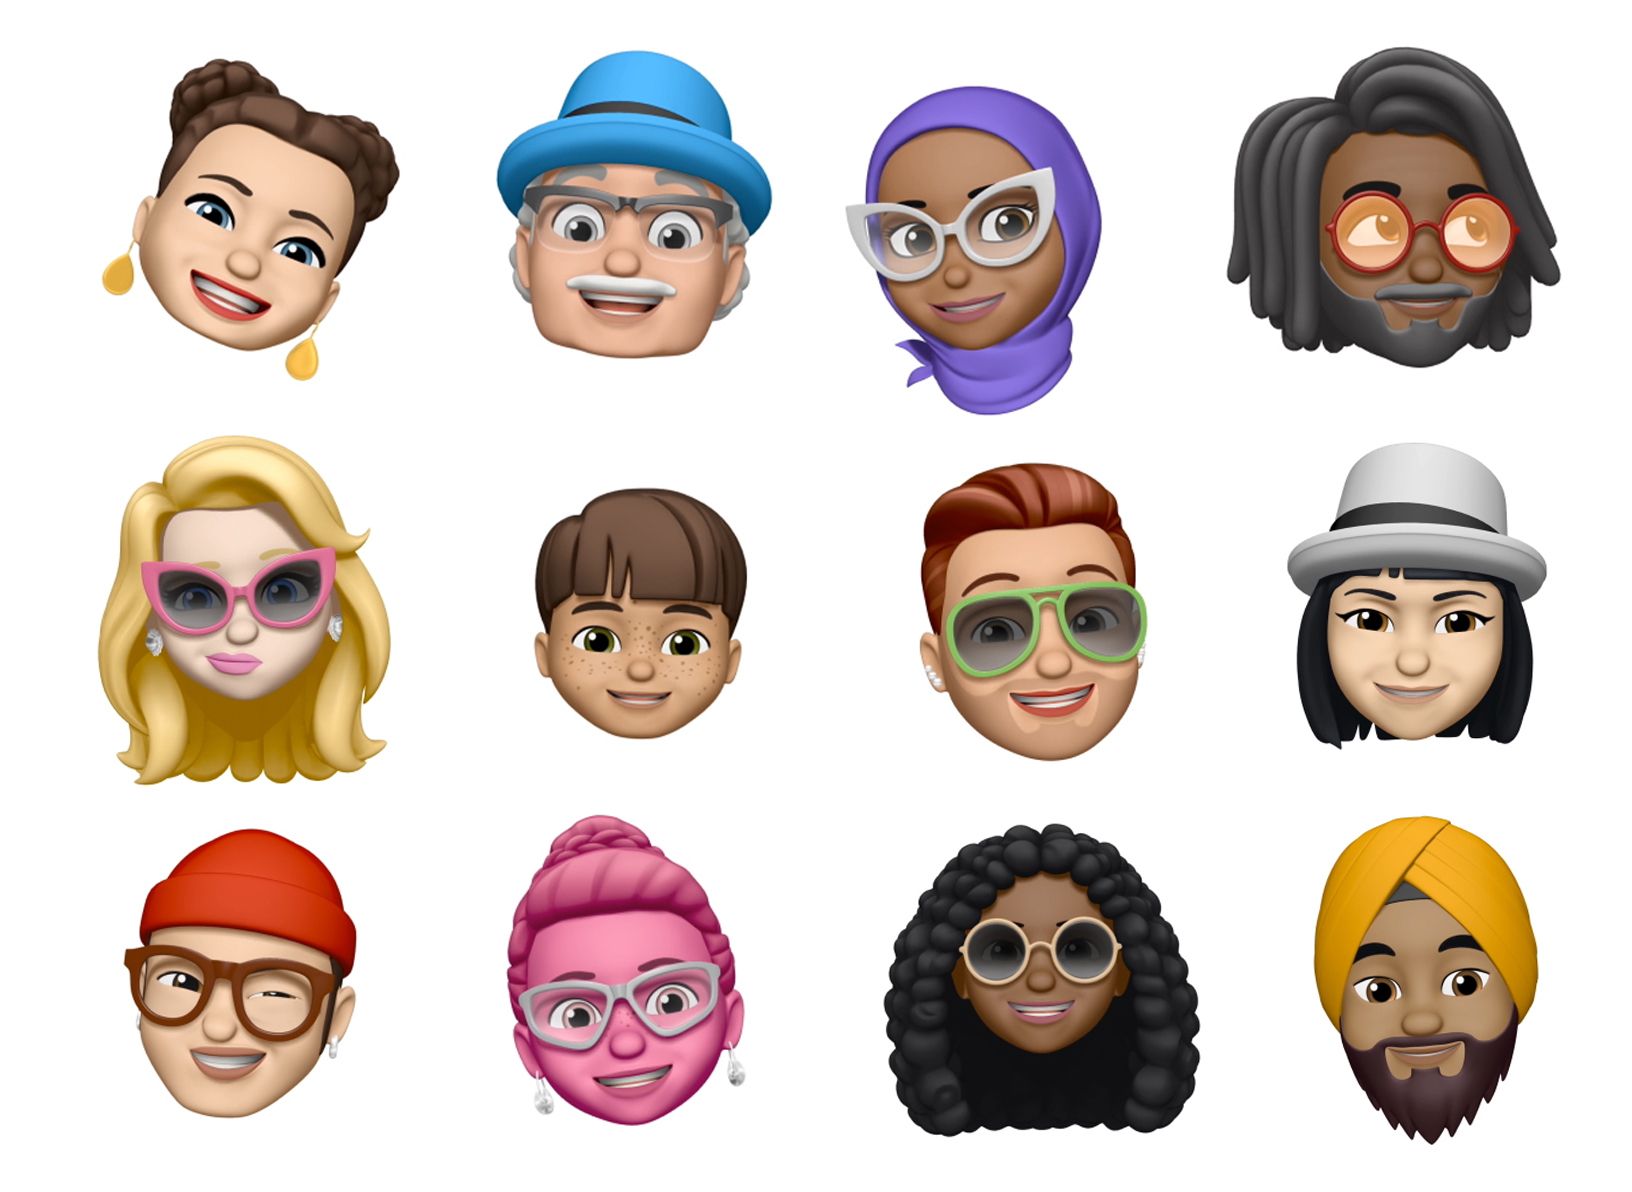 iOS 12 includes new Animoji features and personalized Memoji